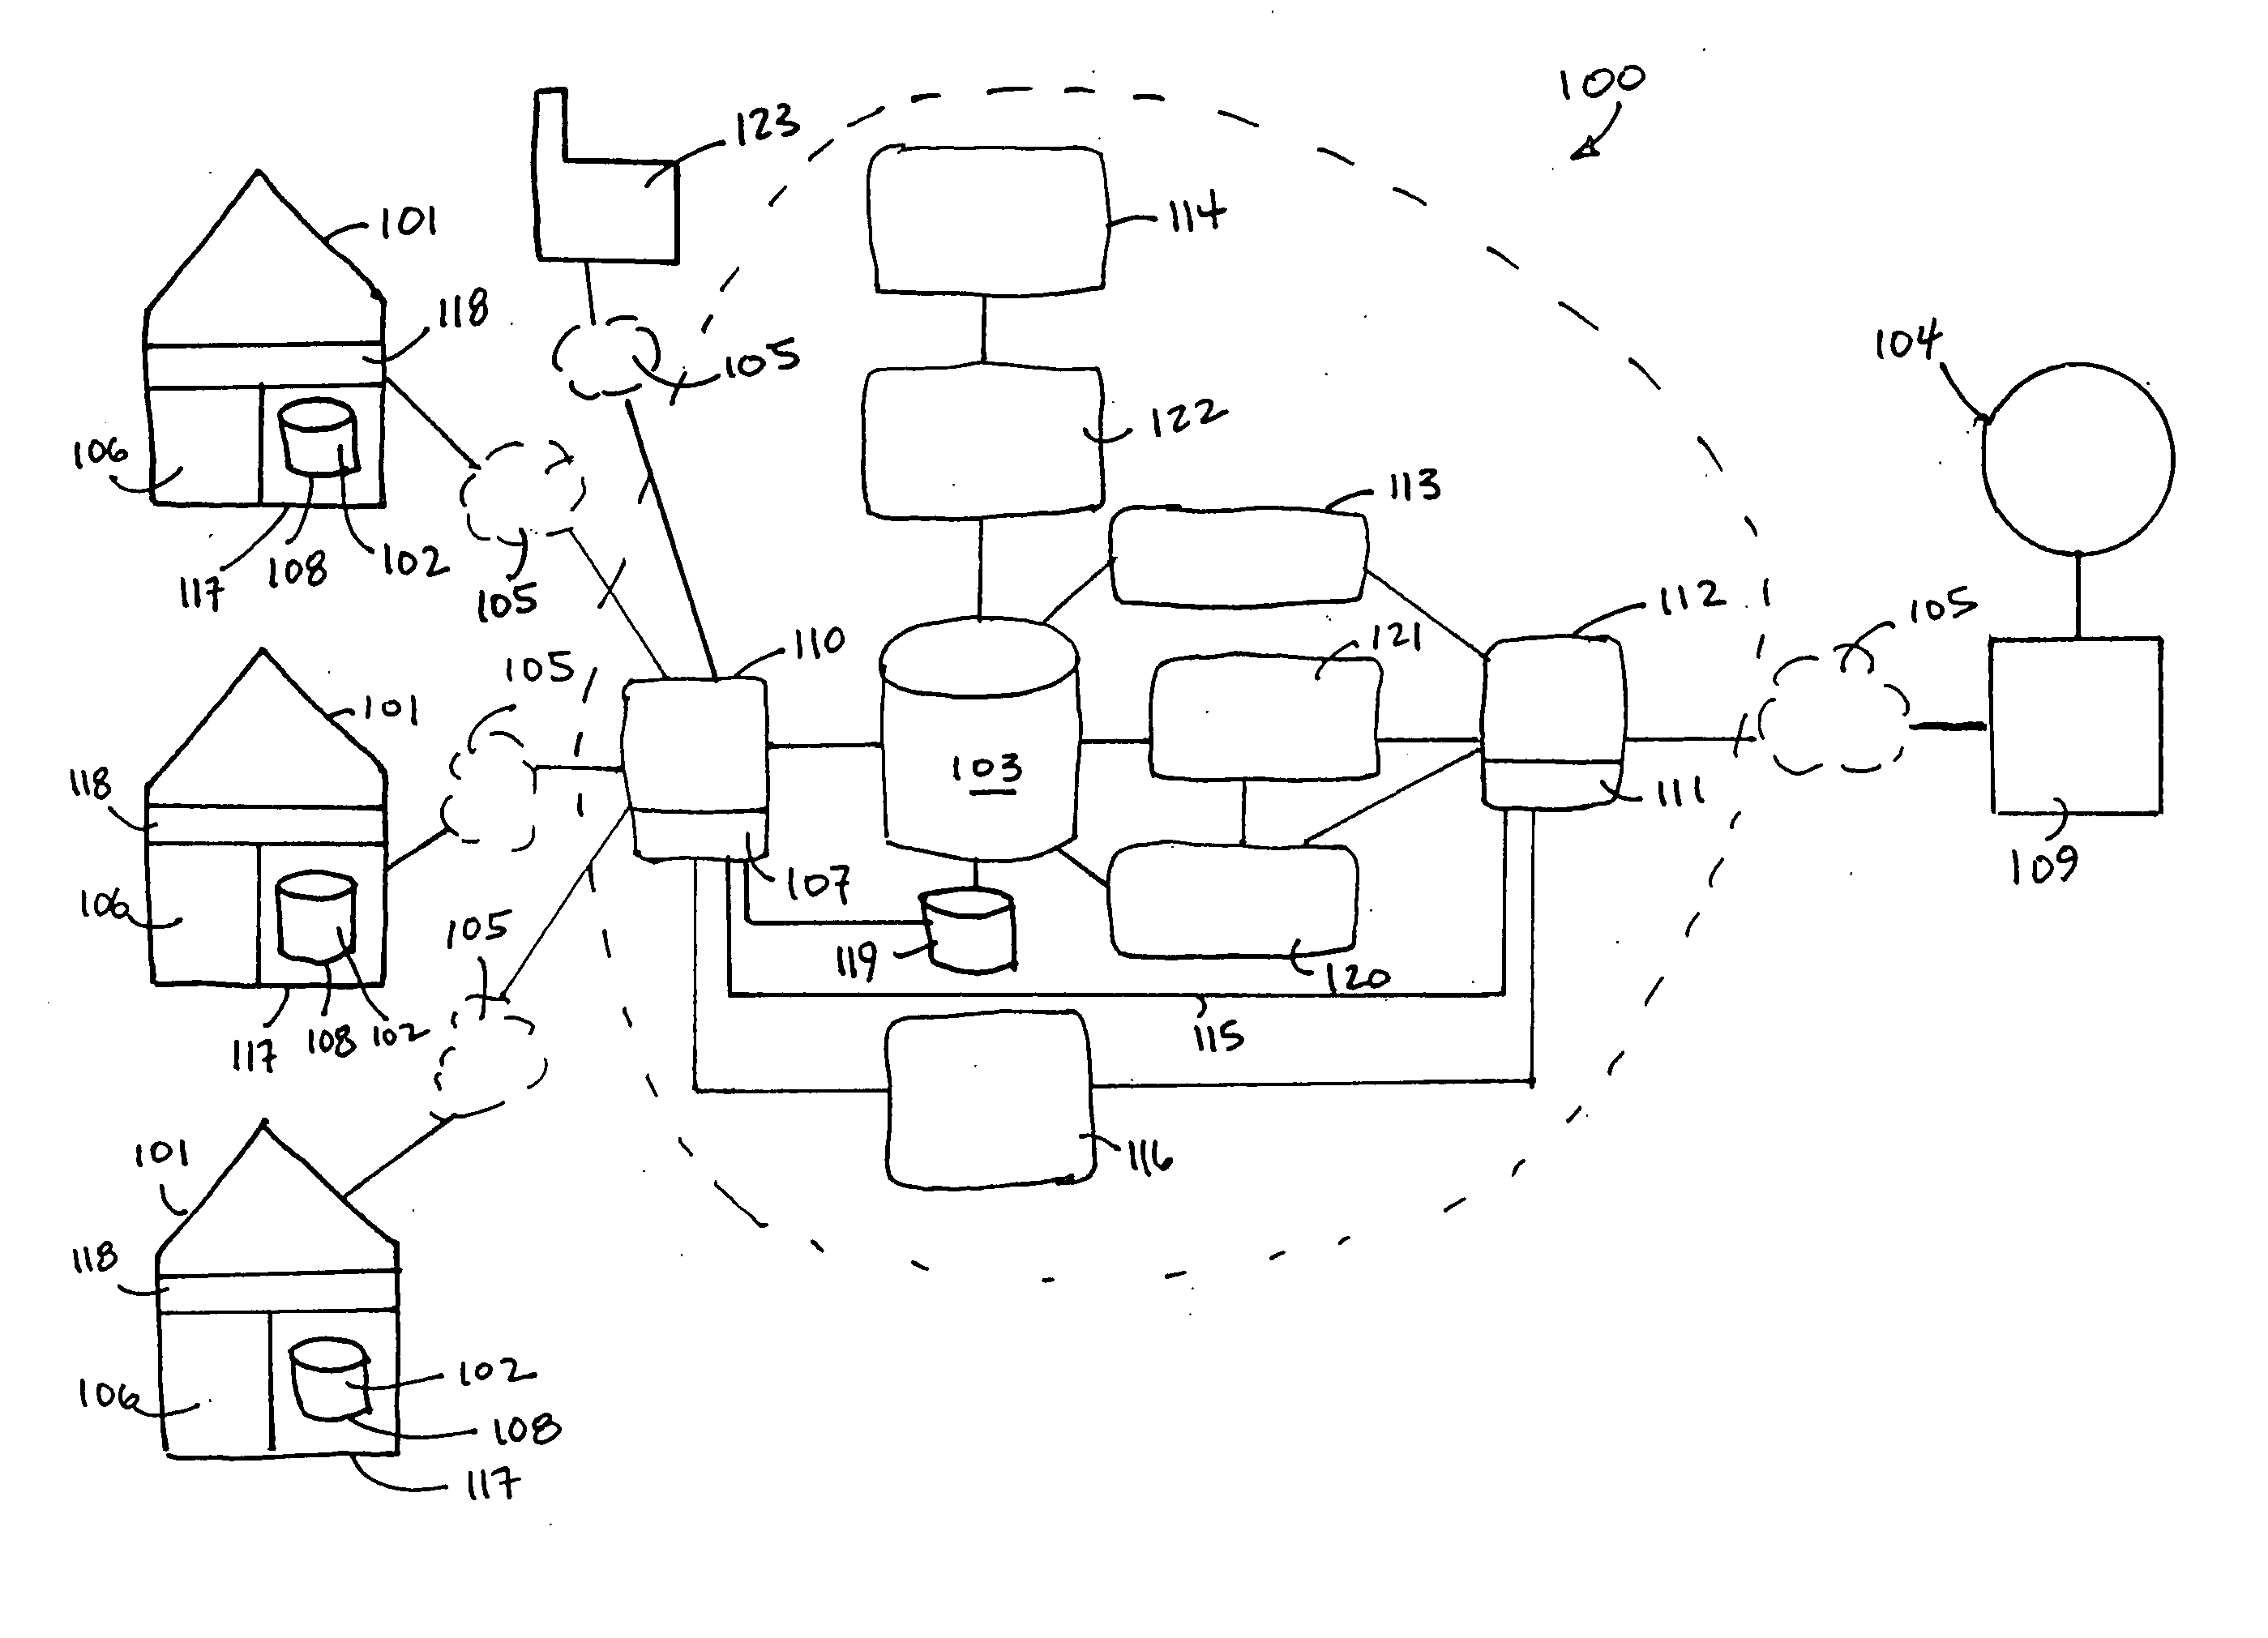 Internet enhanced local shopping system and method